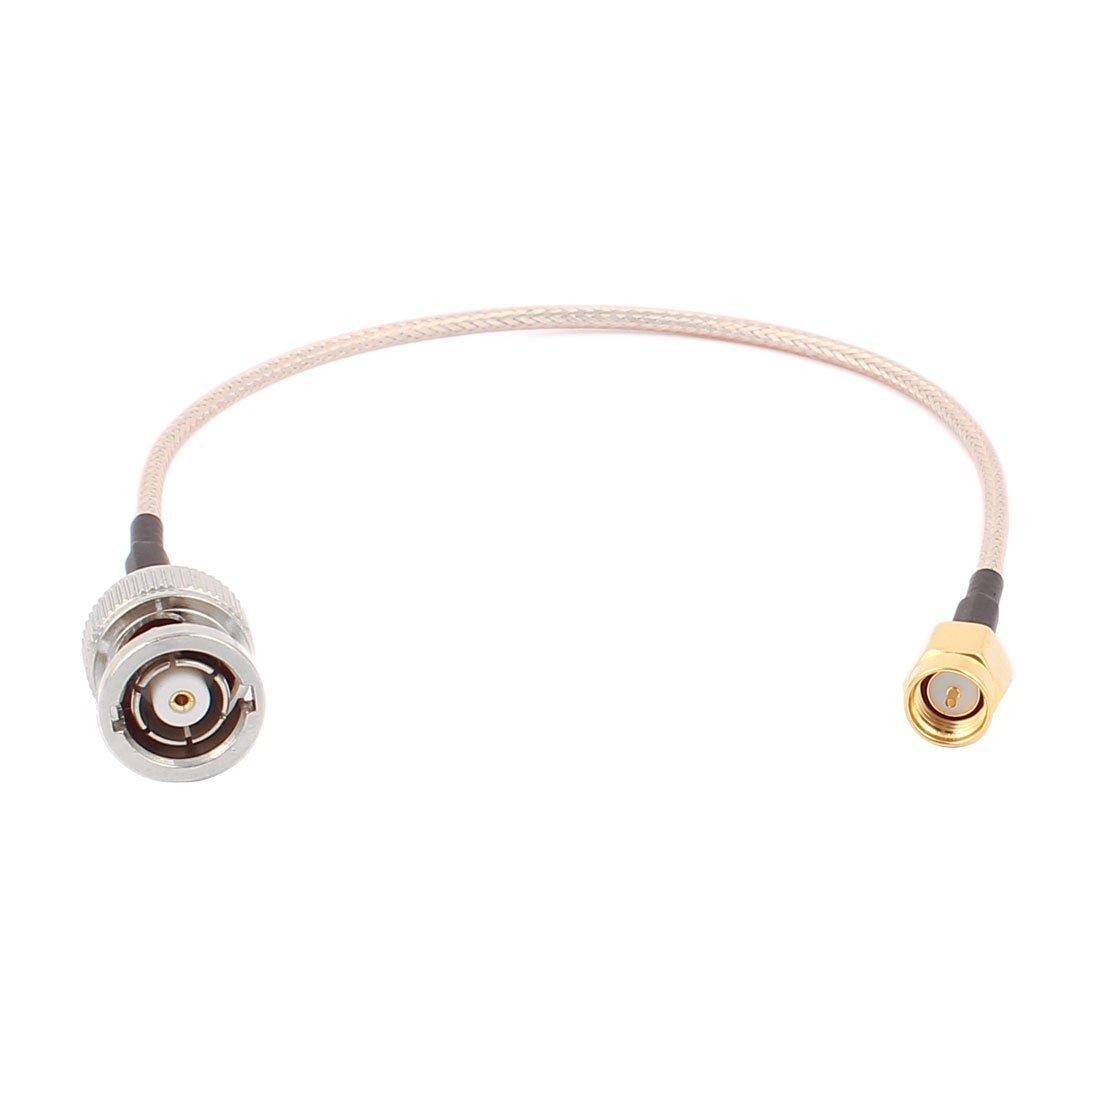 RP-BNC-J Female to SMA-J Male RG316 Coaxial Cable Pigtail 1metre